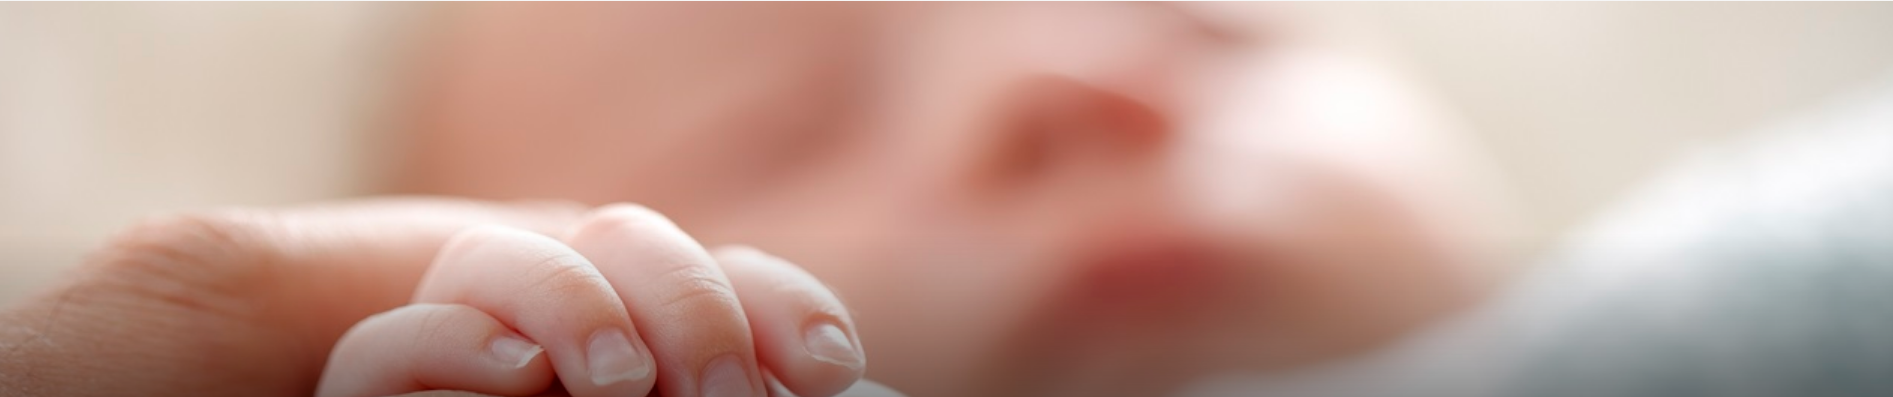 Newborns to be referred to an auditory test